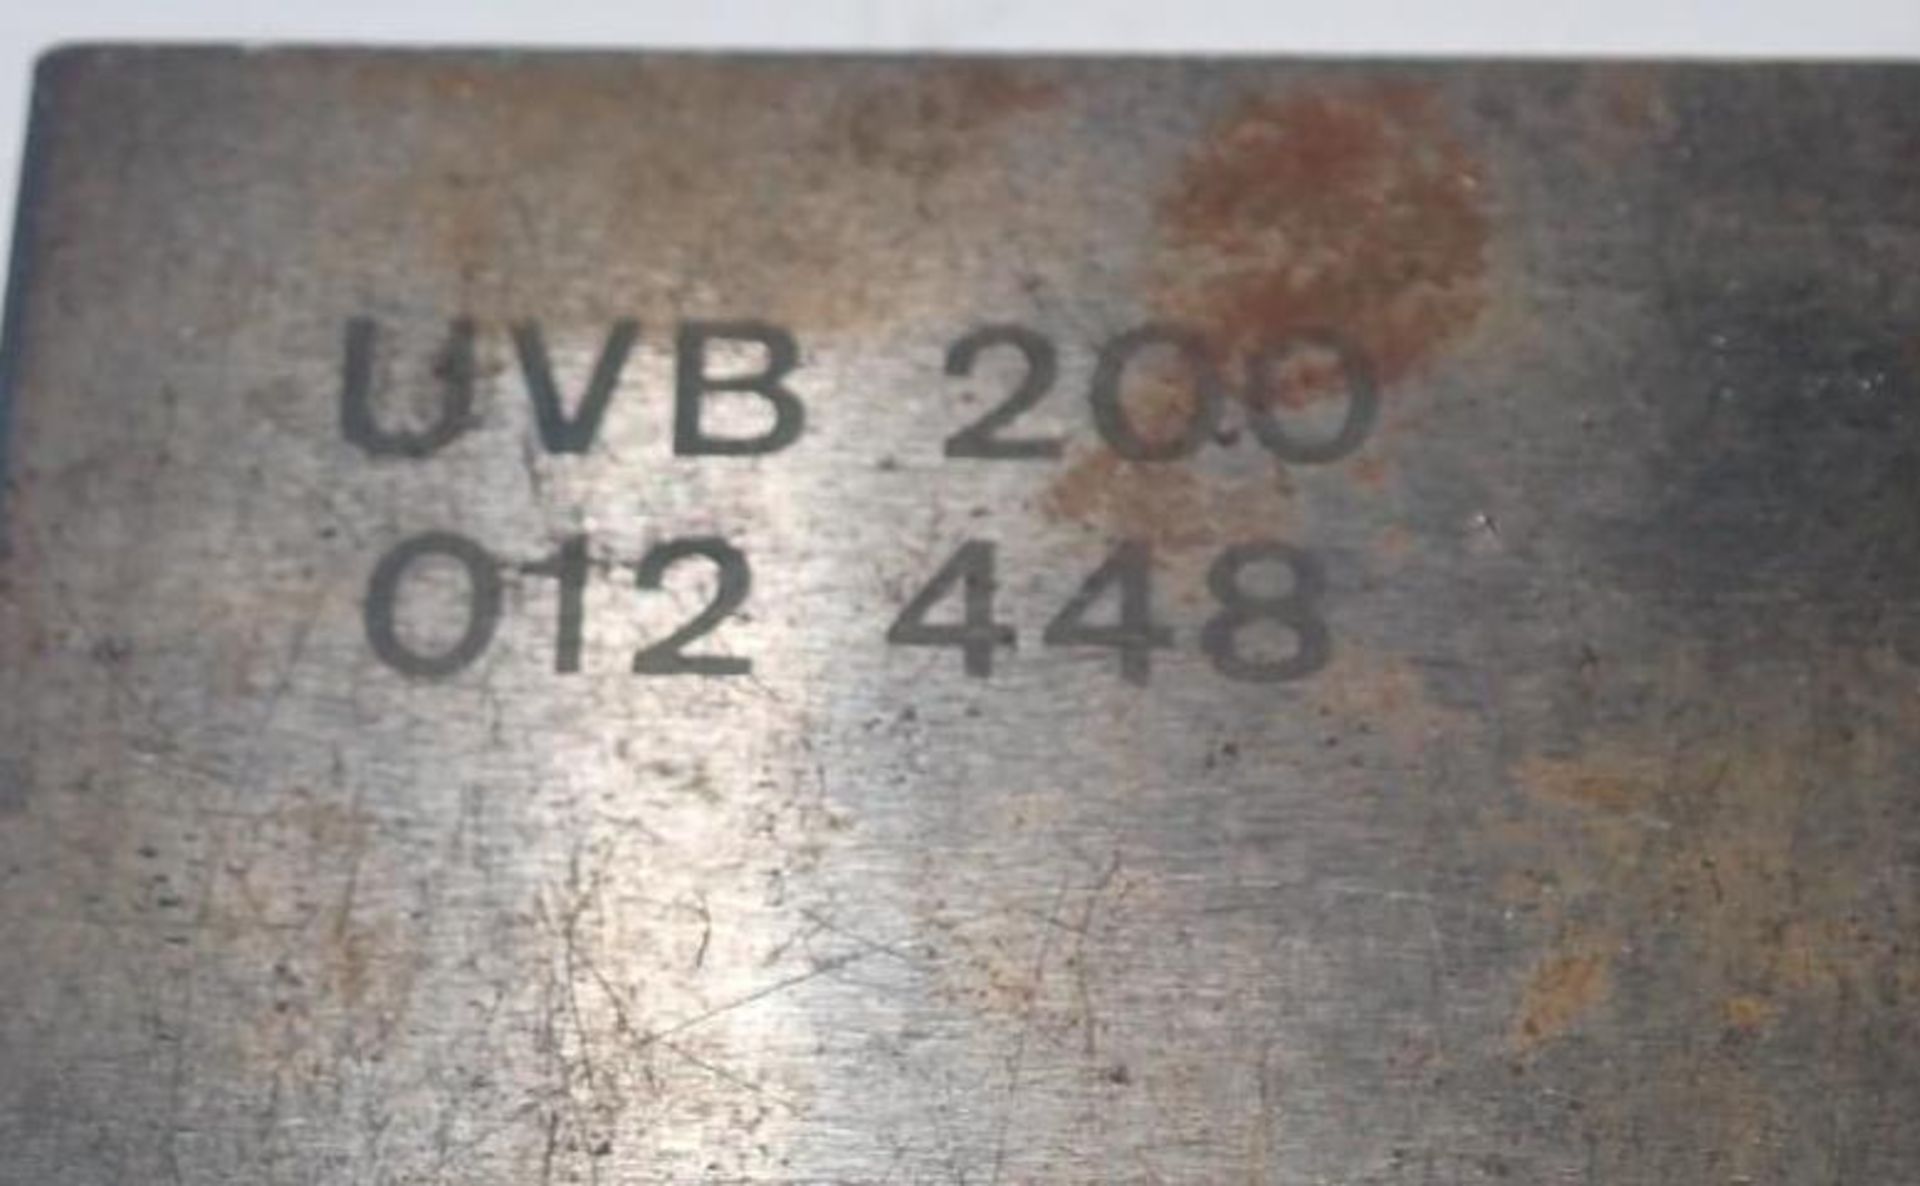 Lot of UVB 200 Chuck Jaws - Image 5 of 5